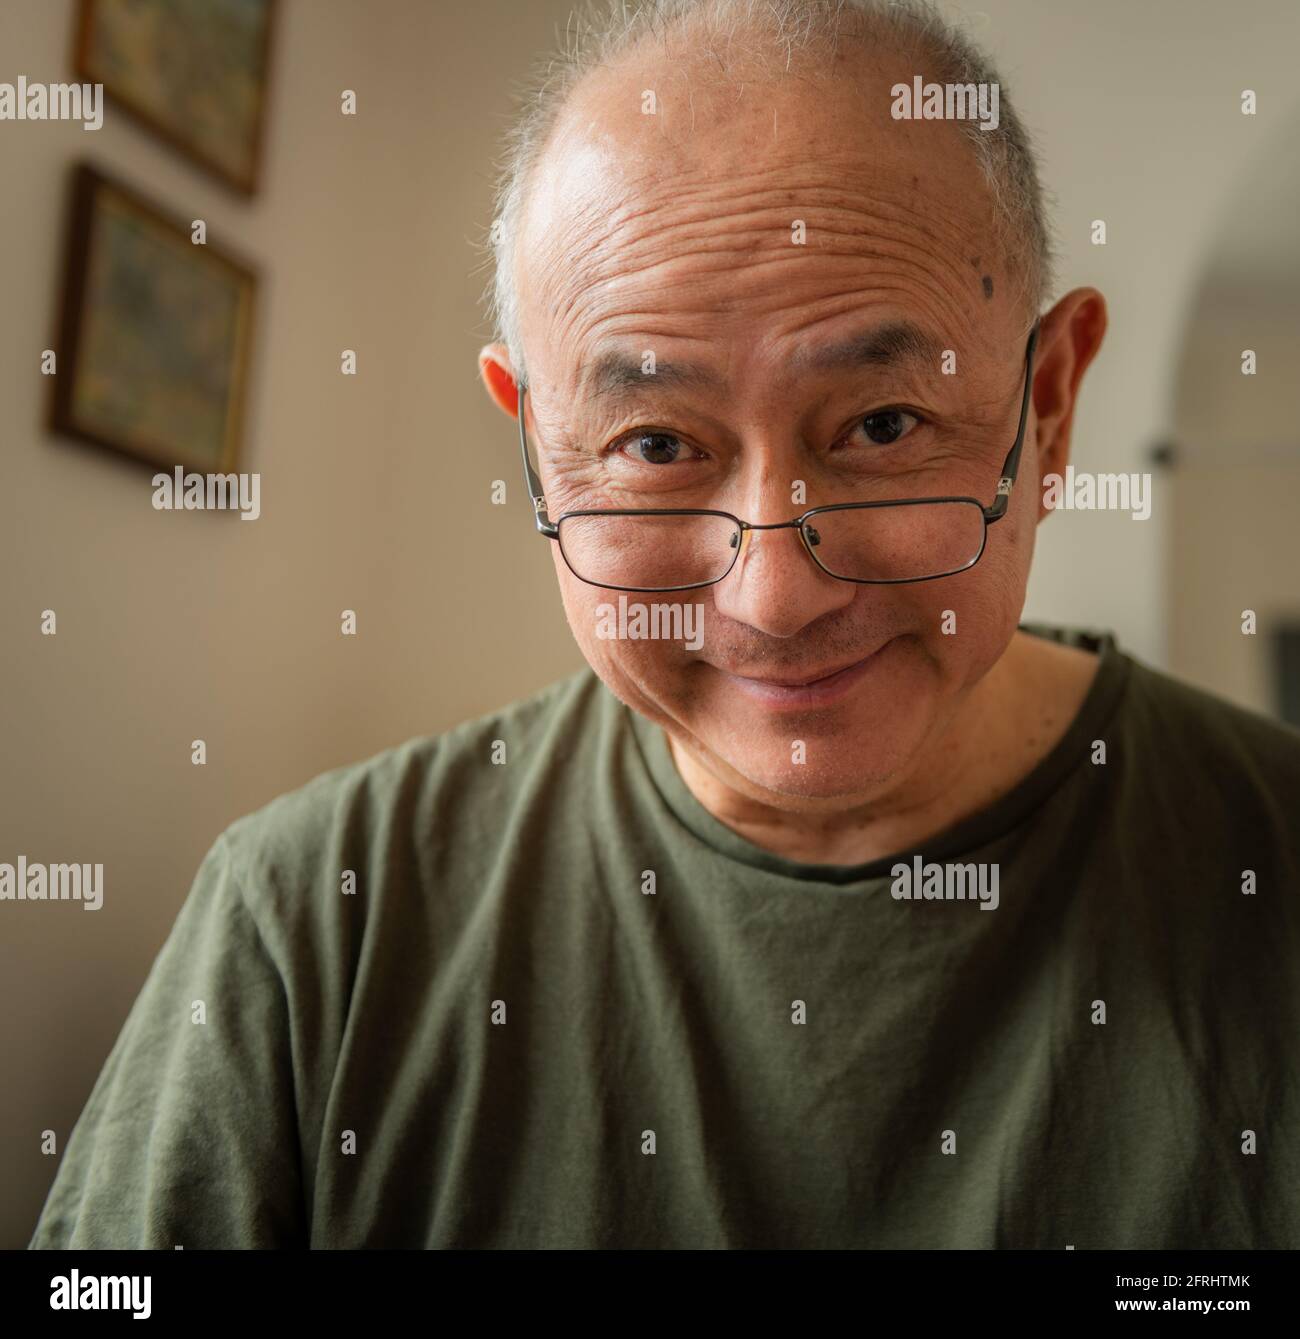 A kind, happy elderly Asian man at home with a smiling facial expression. Stock Photo